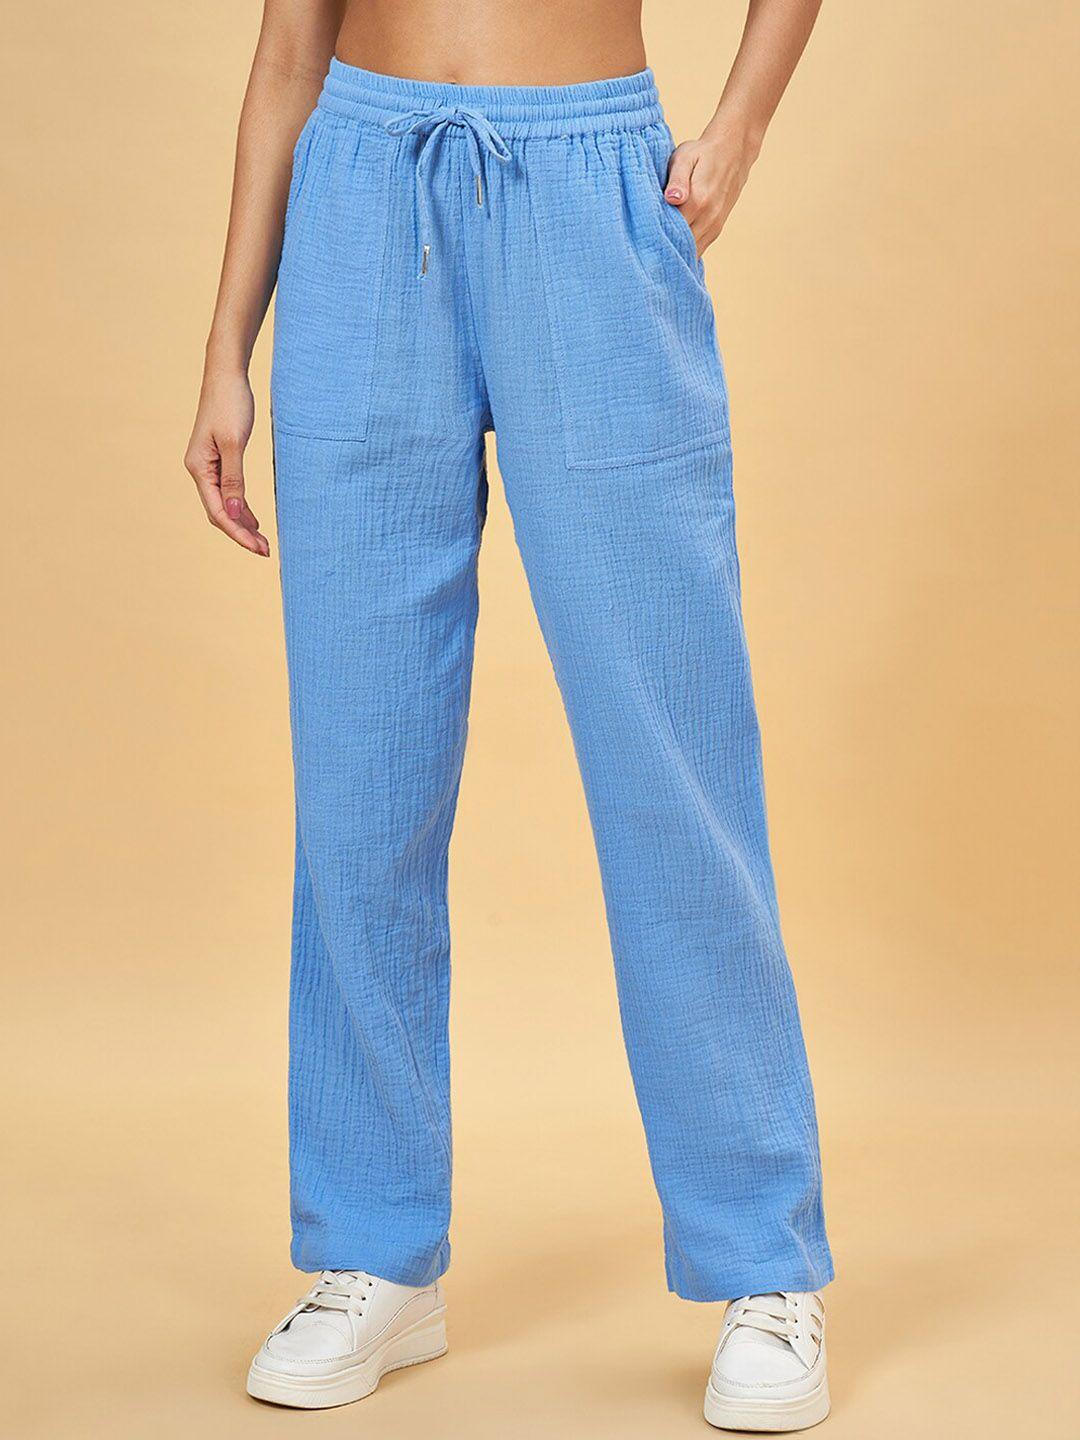 honey by pantaloons women high-rise trousers